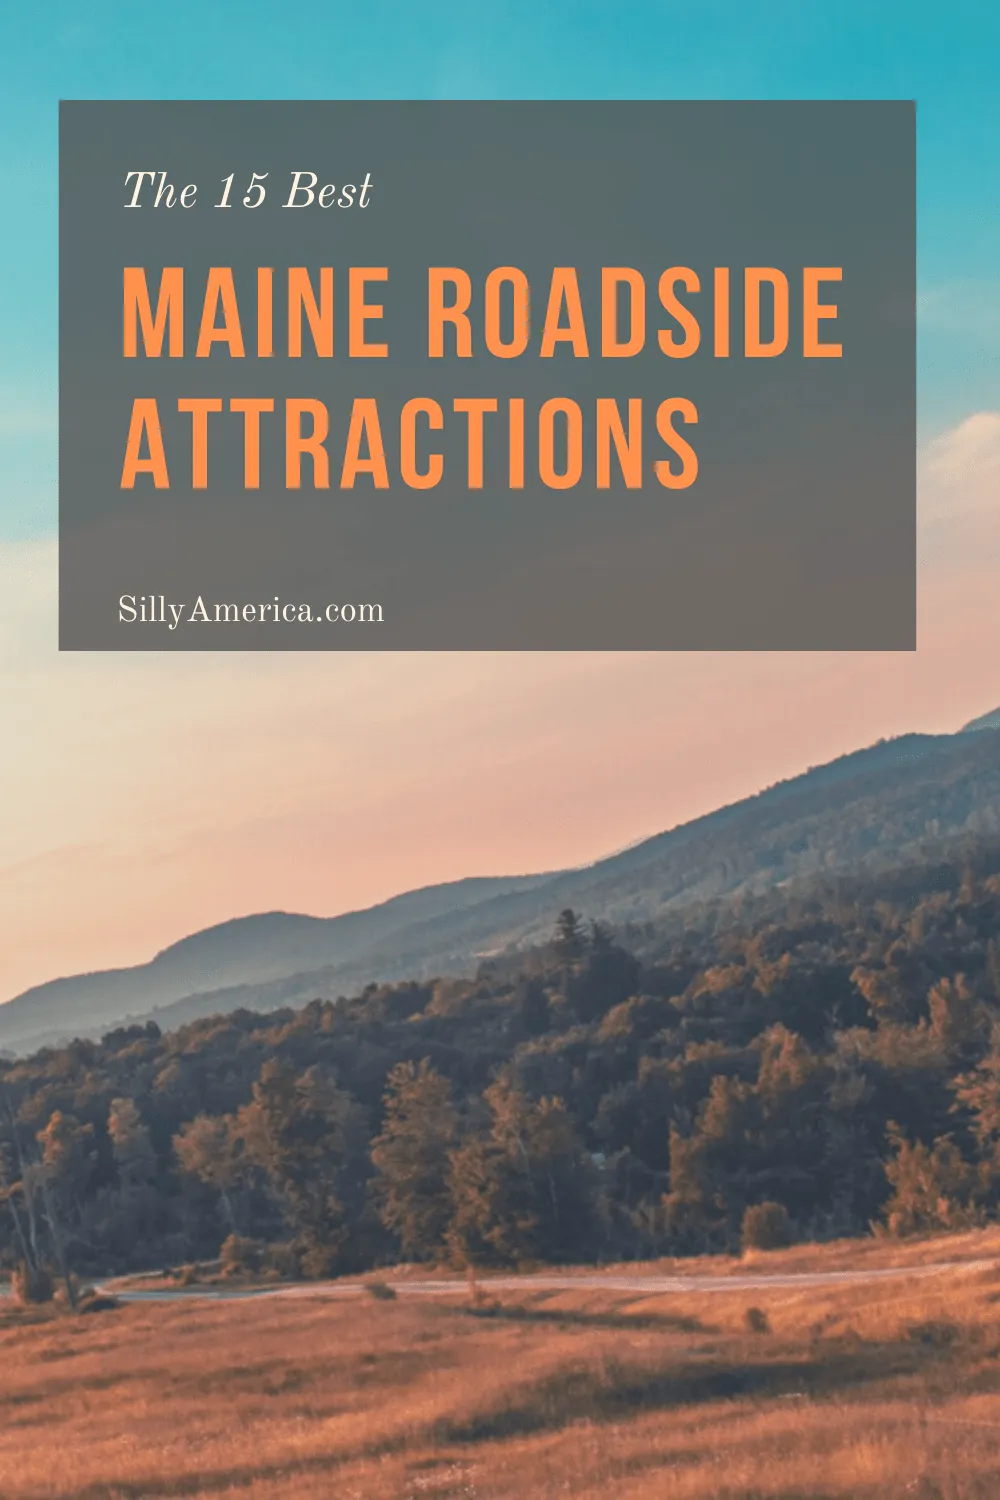 The best Maine roadside attractions to visit on an Maine road trip. Add these roadside oddities to your travel bucket list, itinerary, or route map! Great road trip stops for kids or adults! #MaineRoadsideAttractions #MaineRoadsideAttraction #RoadsideAttractions #RoadsideAttraction #RoadTrip #MaineRoadTrip #MaineRoadTripItinerary #MaineRoadTripBucketLists #MaineBucketLists #FallMaineRoadTrip #MaineRoadTripMaps #MaineRoadTripWithKids #CoastalMaineRoadTrip #WeirdRoadsideAttractions